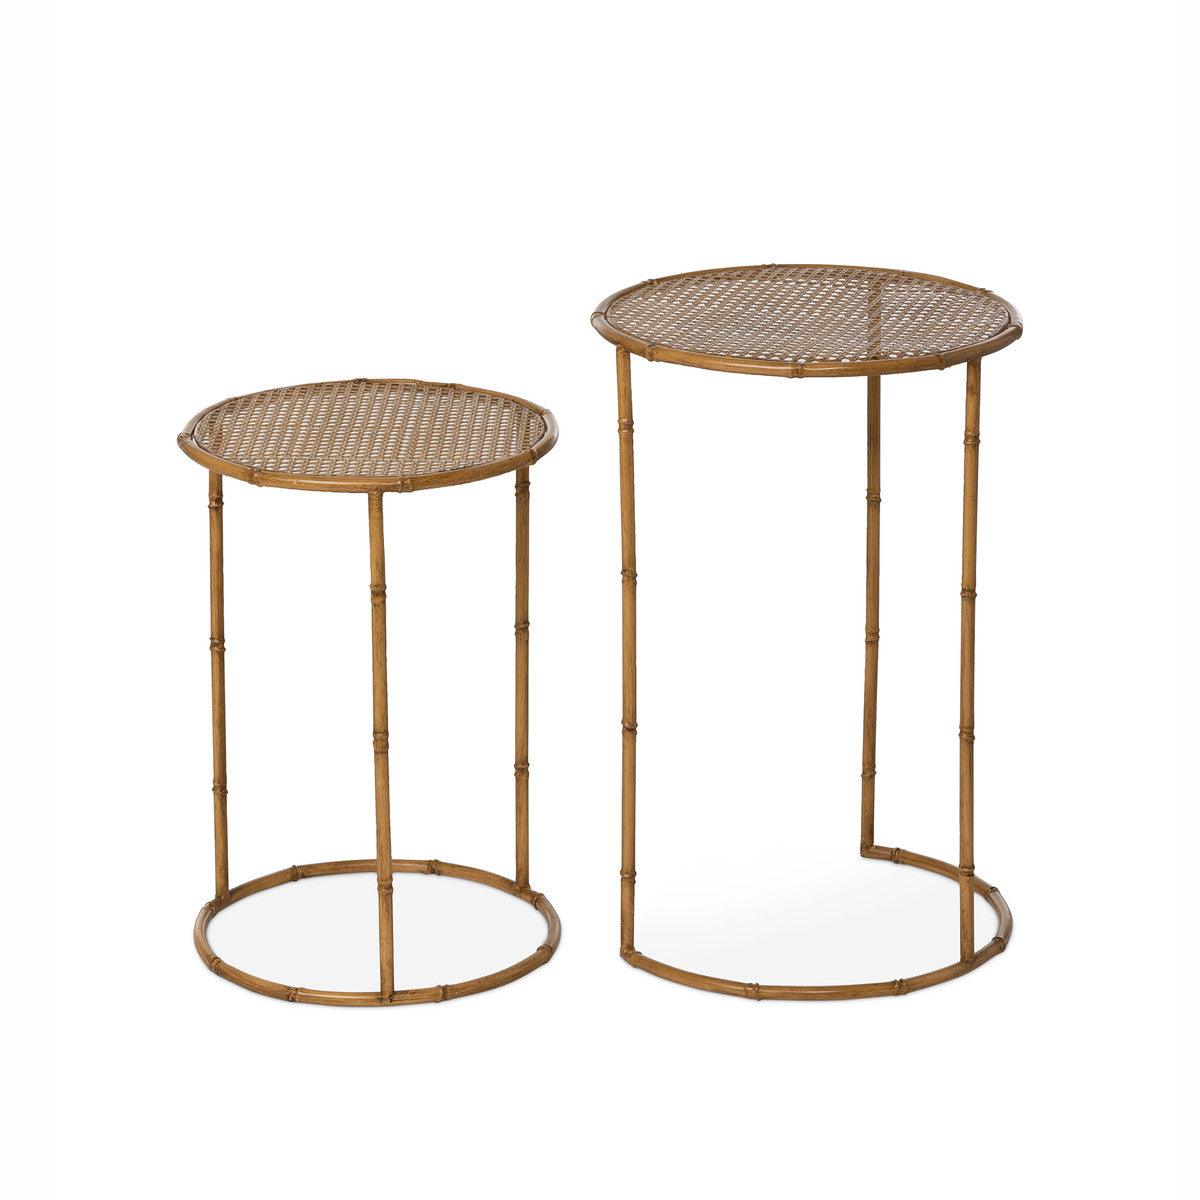 Roanoke Metal Occasional Nesting Tables, Set of 2 - Signastyle Boutique